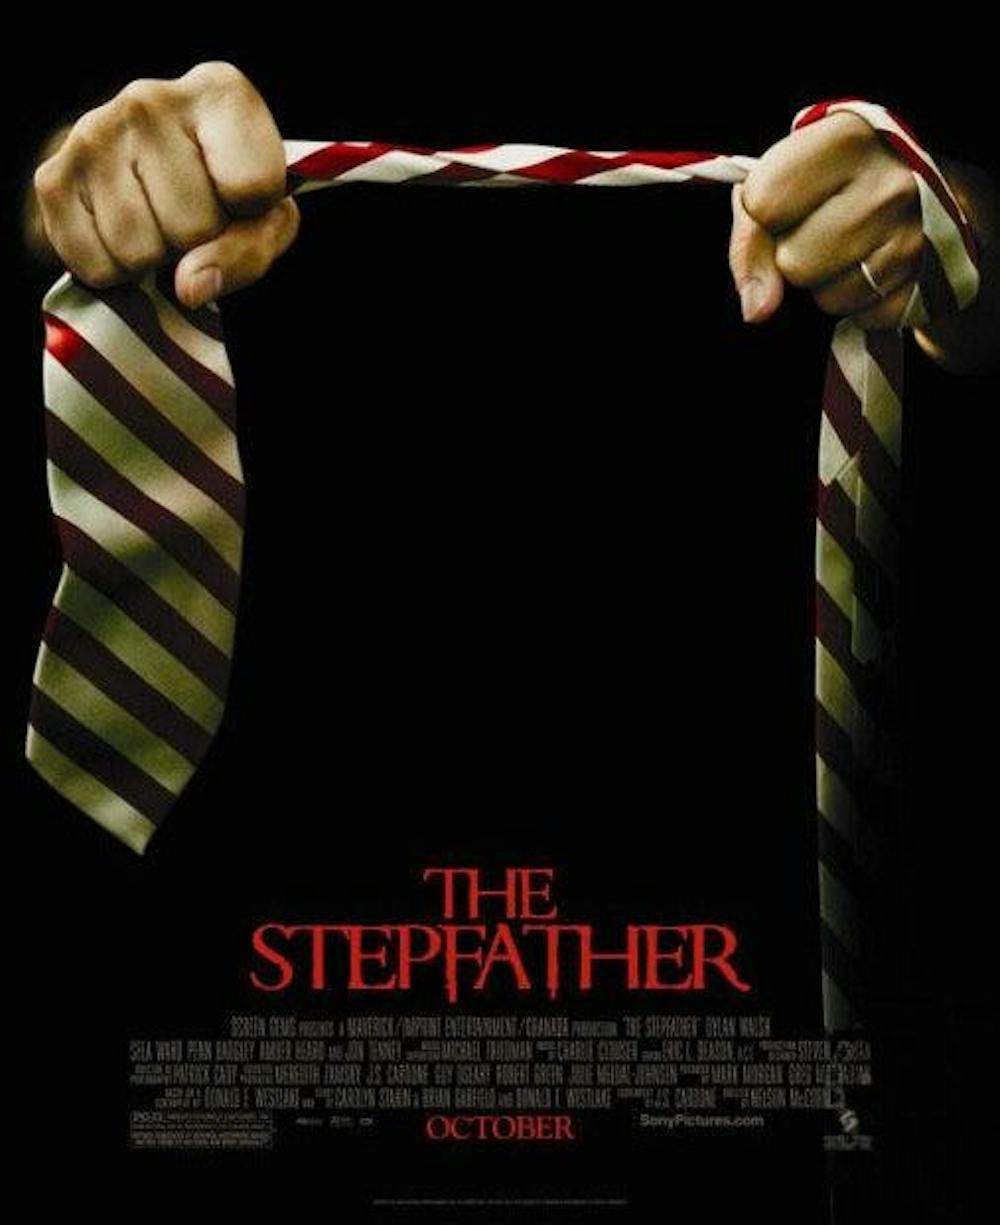 "The Stepfather"